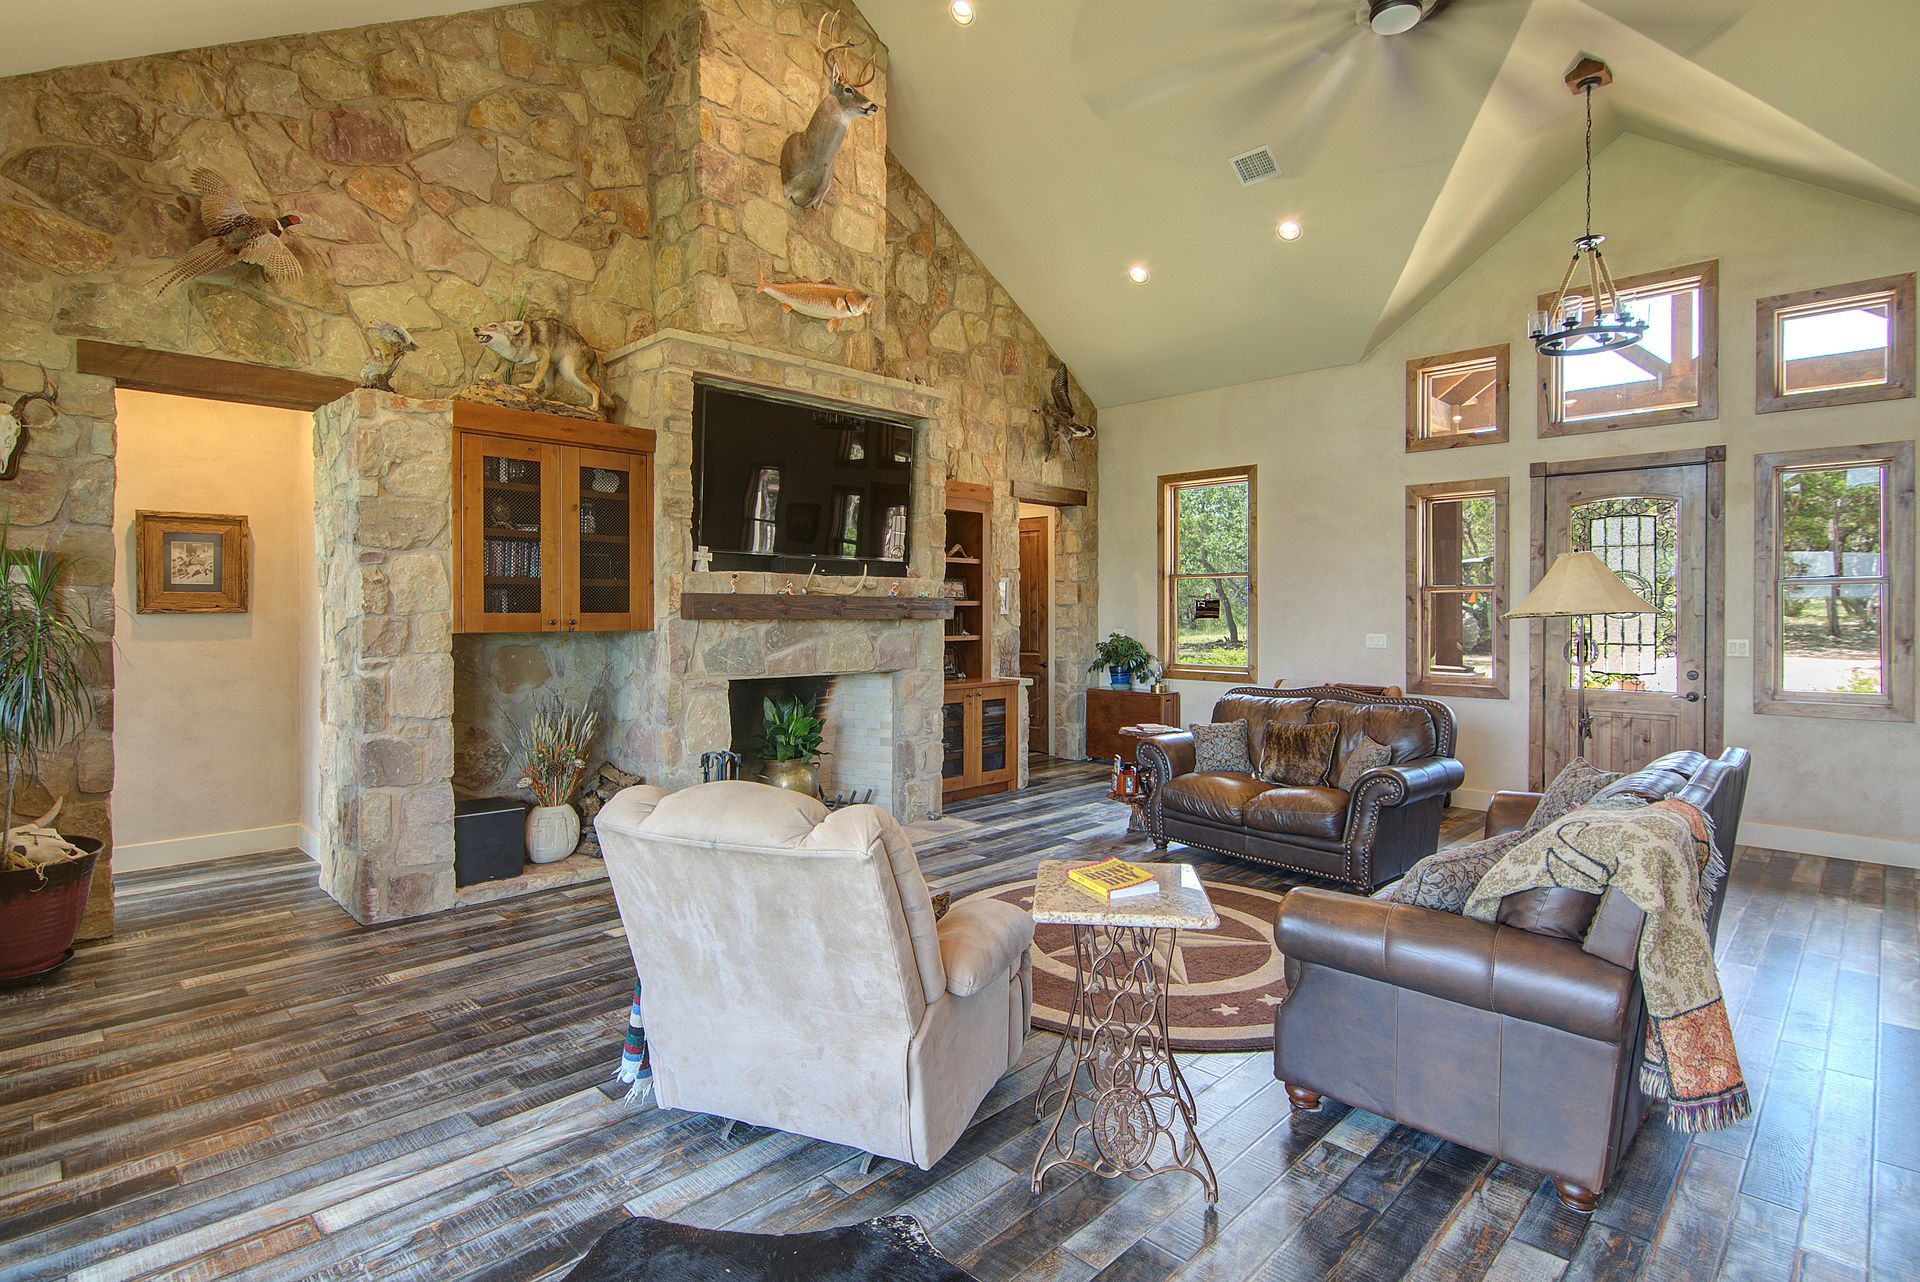 A living room with a vaulted ceiling and a fireplace